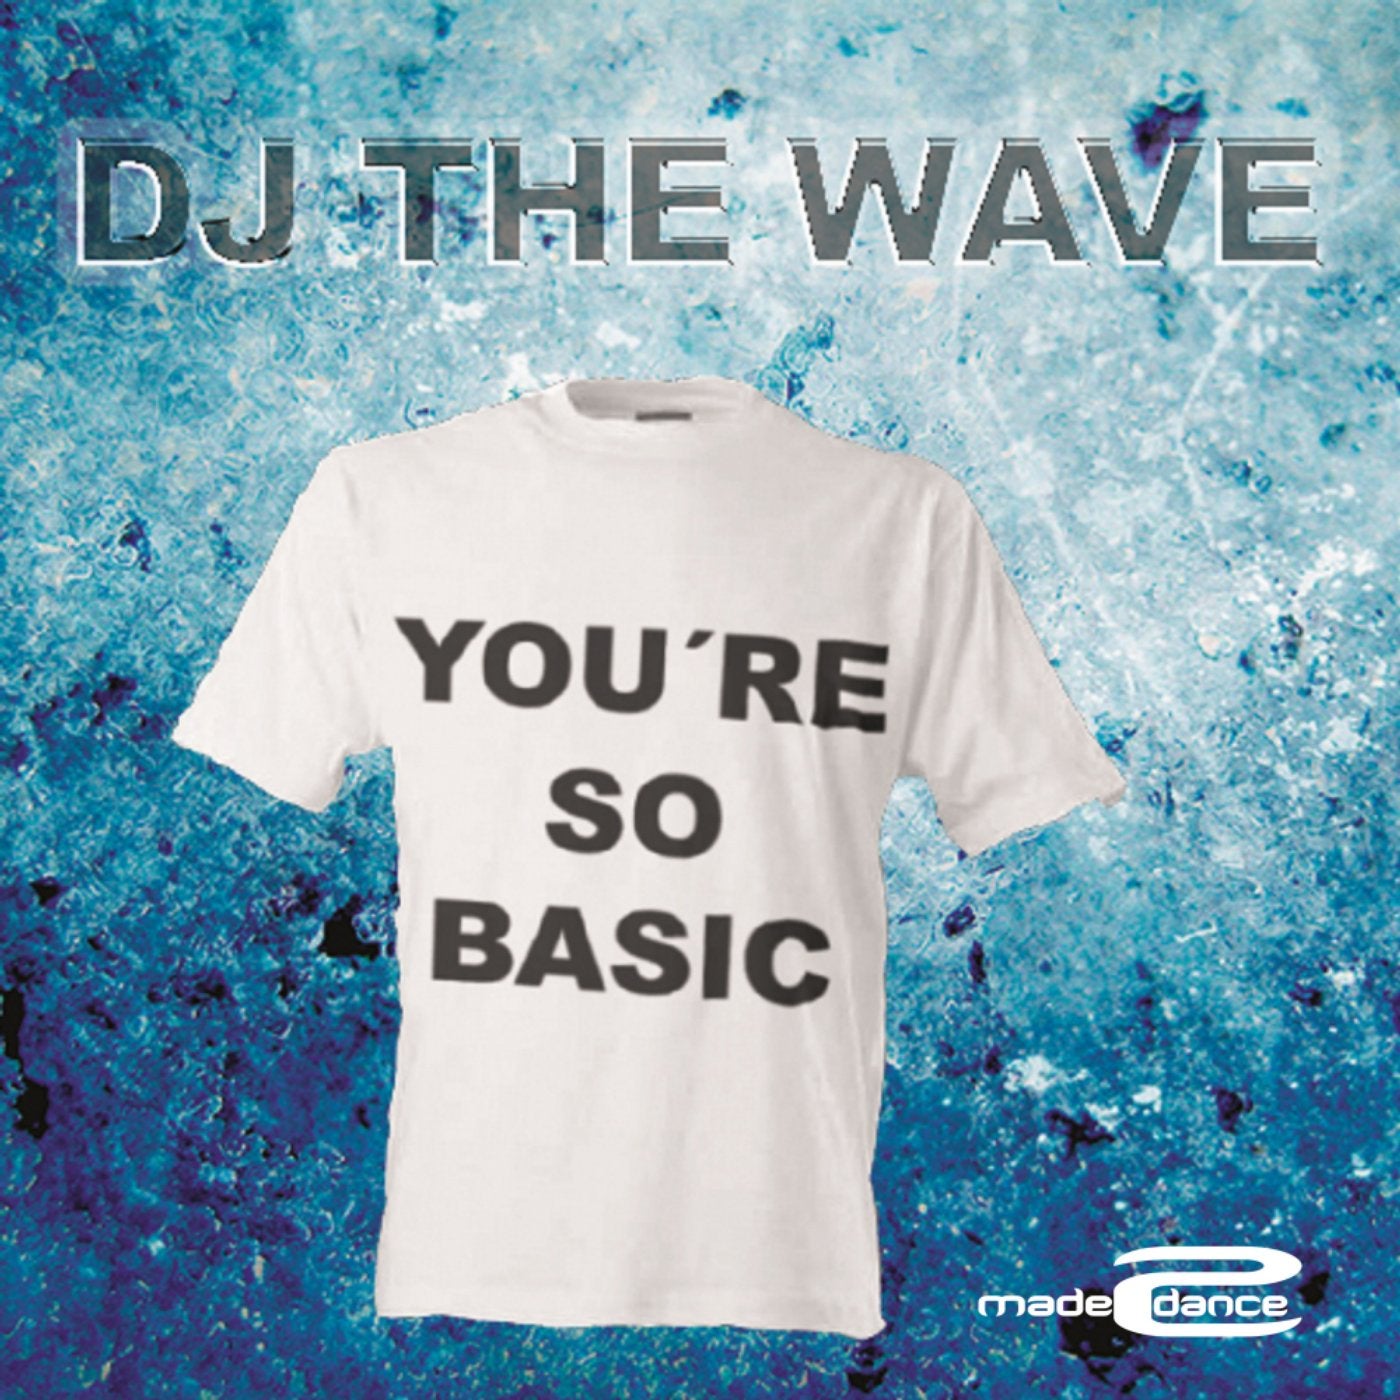 You're So Basic (Club Mix) by DJ The Wave on Beatport